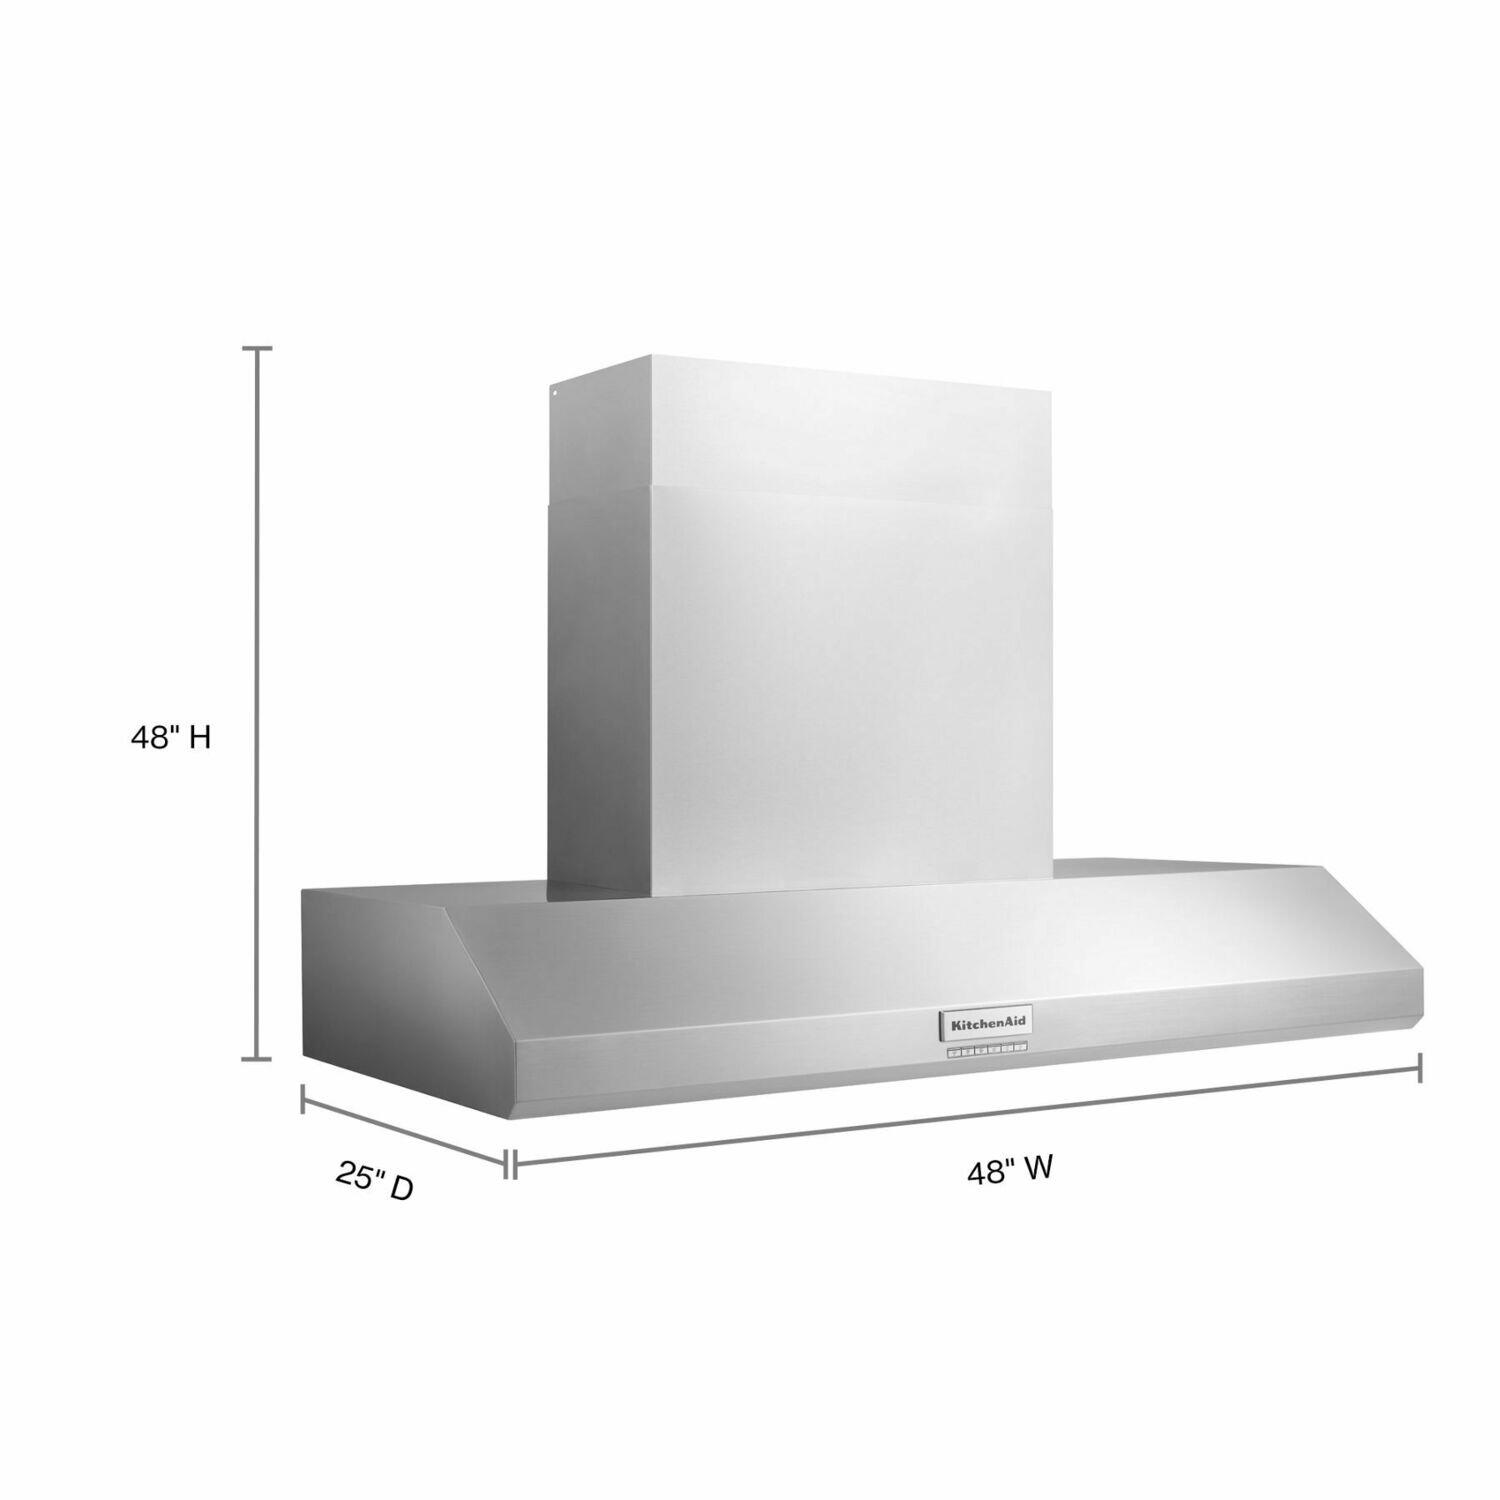 Kitchenaid KVWC958KSS 48'' 585 Or 1170 Cfm Motor Class Commercial-Style Wall-Mount Canopy Range Hood - Stainless Steel